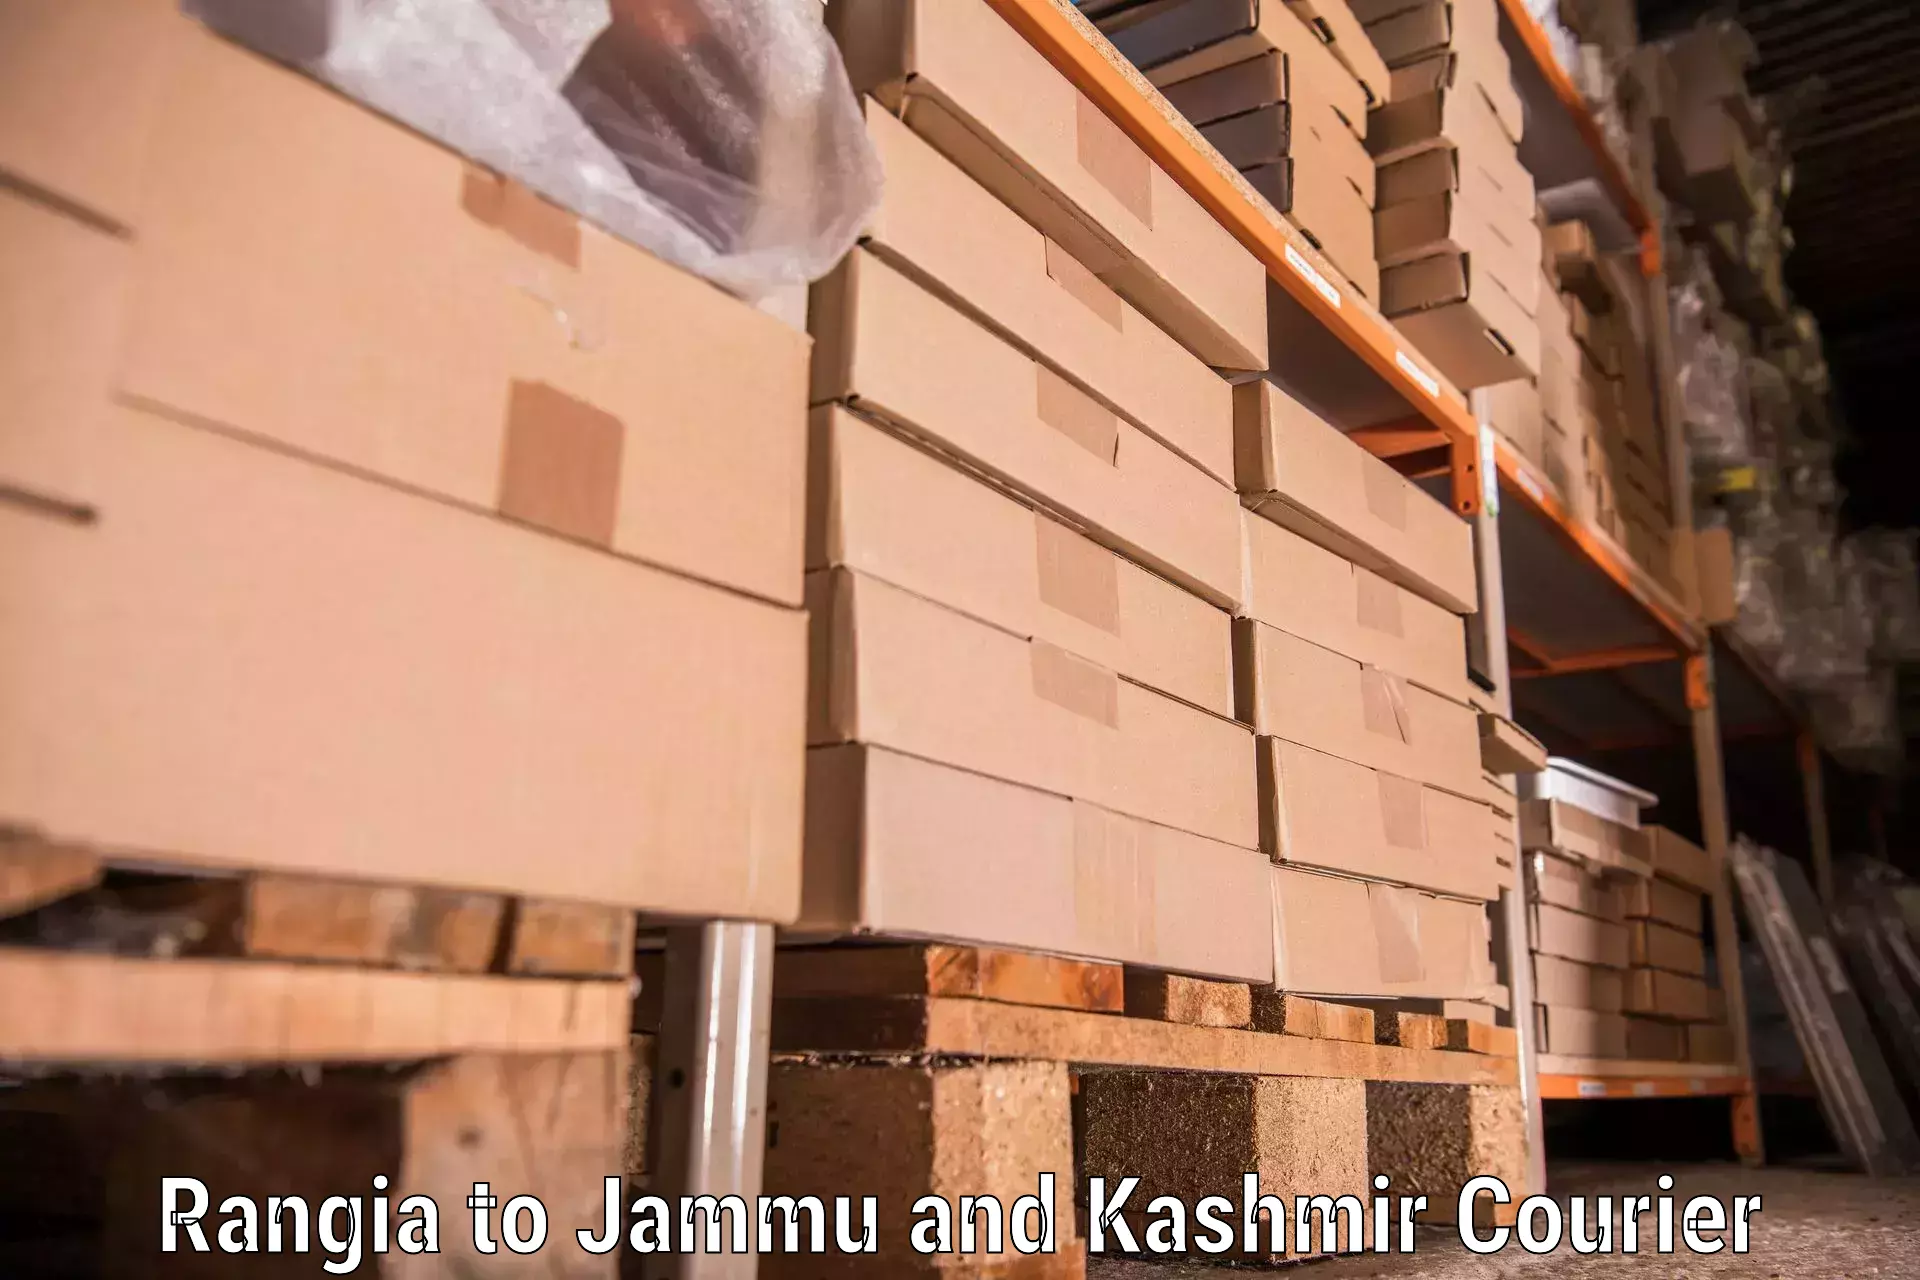 Moving and storage services in Rangia to Shopian